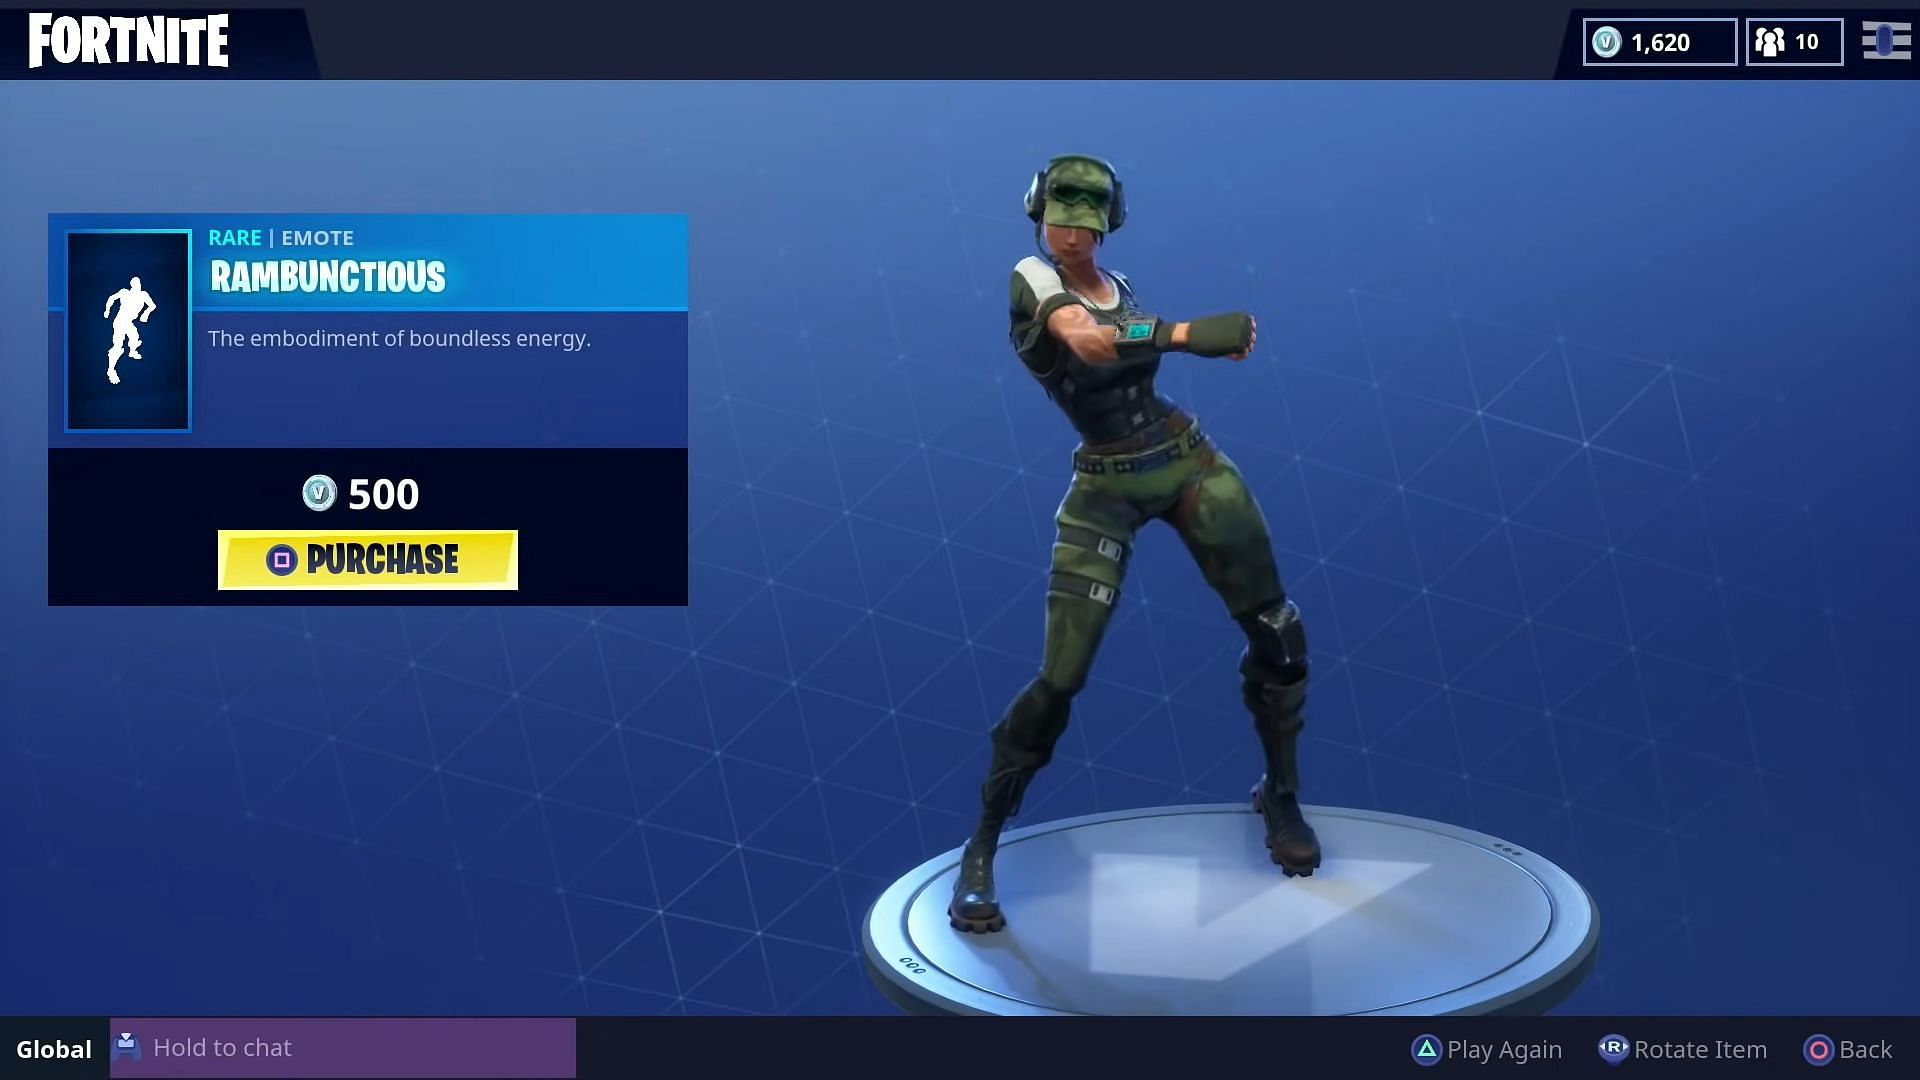 Is Rambunctious the rarest emote in Fortnite?